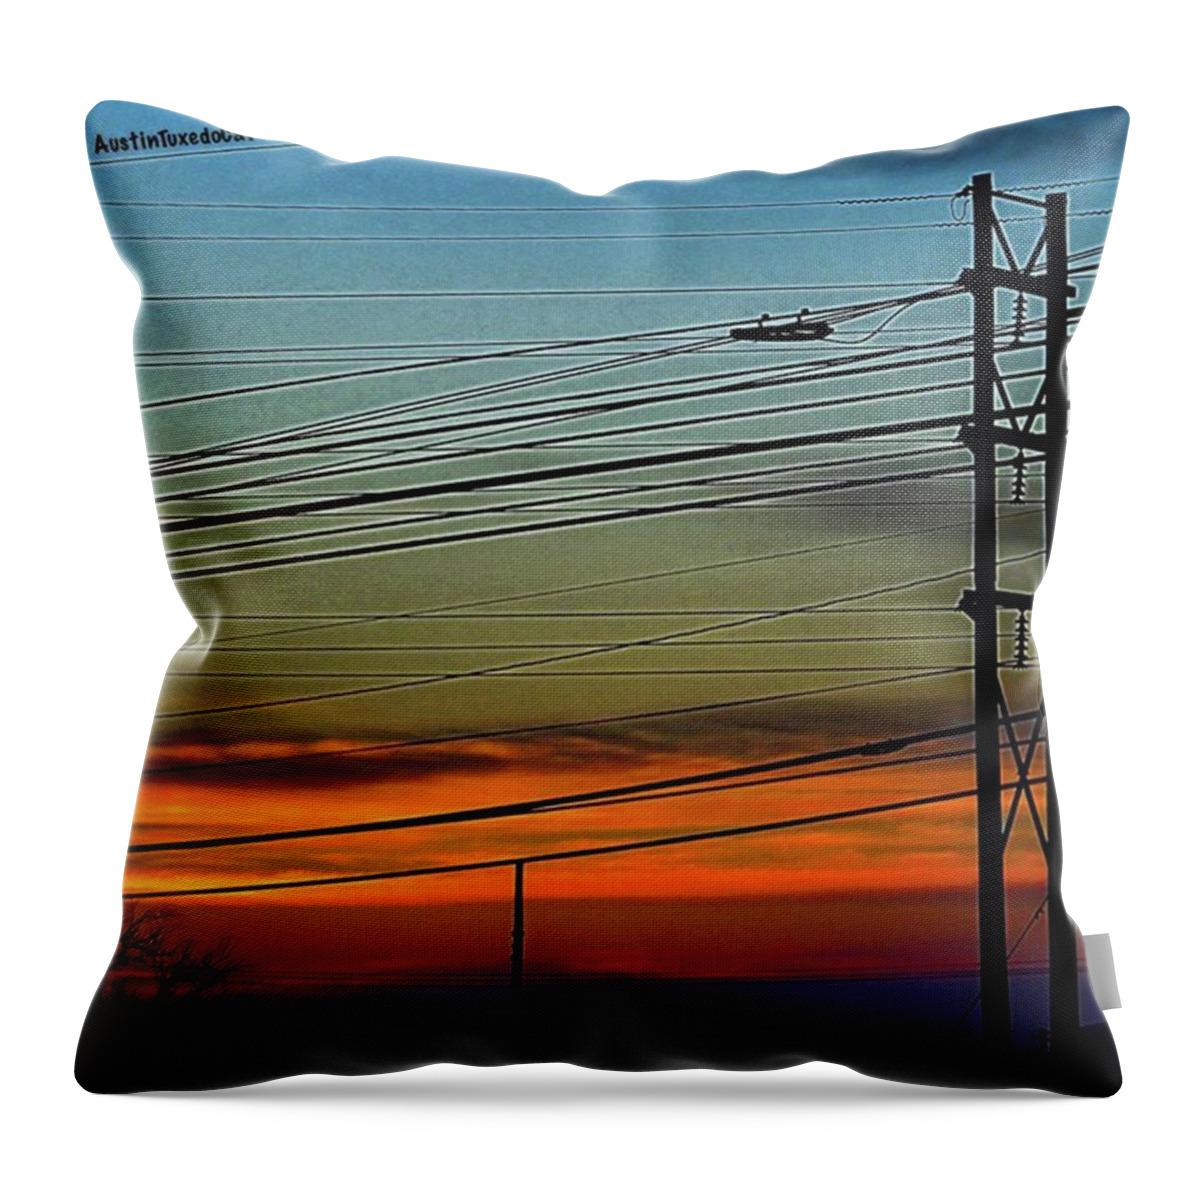 Wires Throw Pillow featuring the photograph I Think That A Few #wires Are by Austin Tuxedo Cat